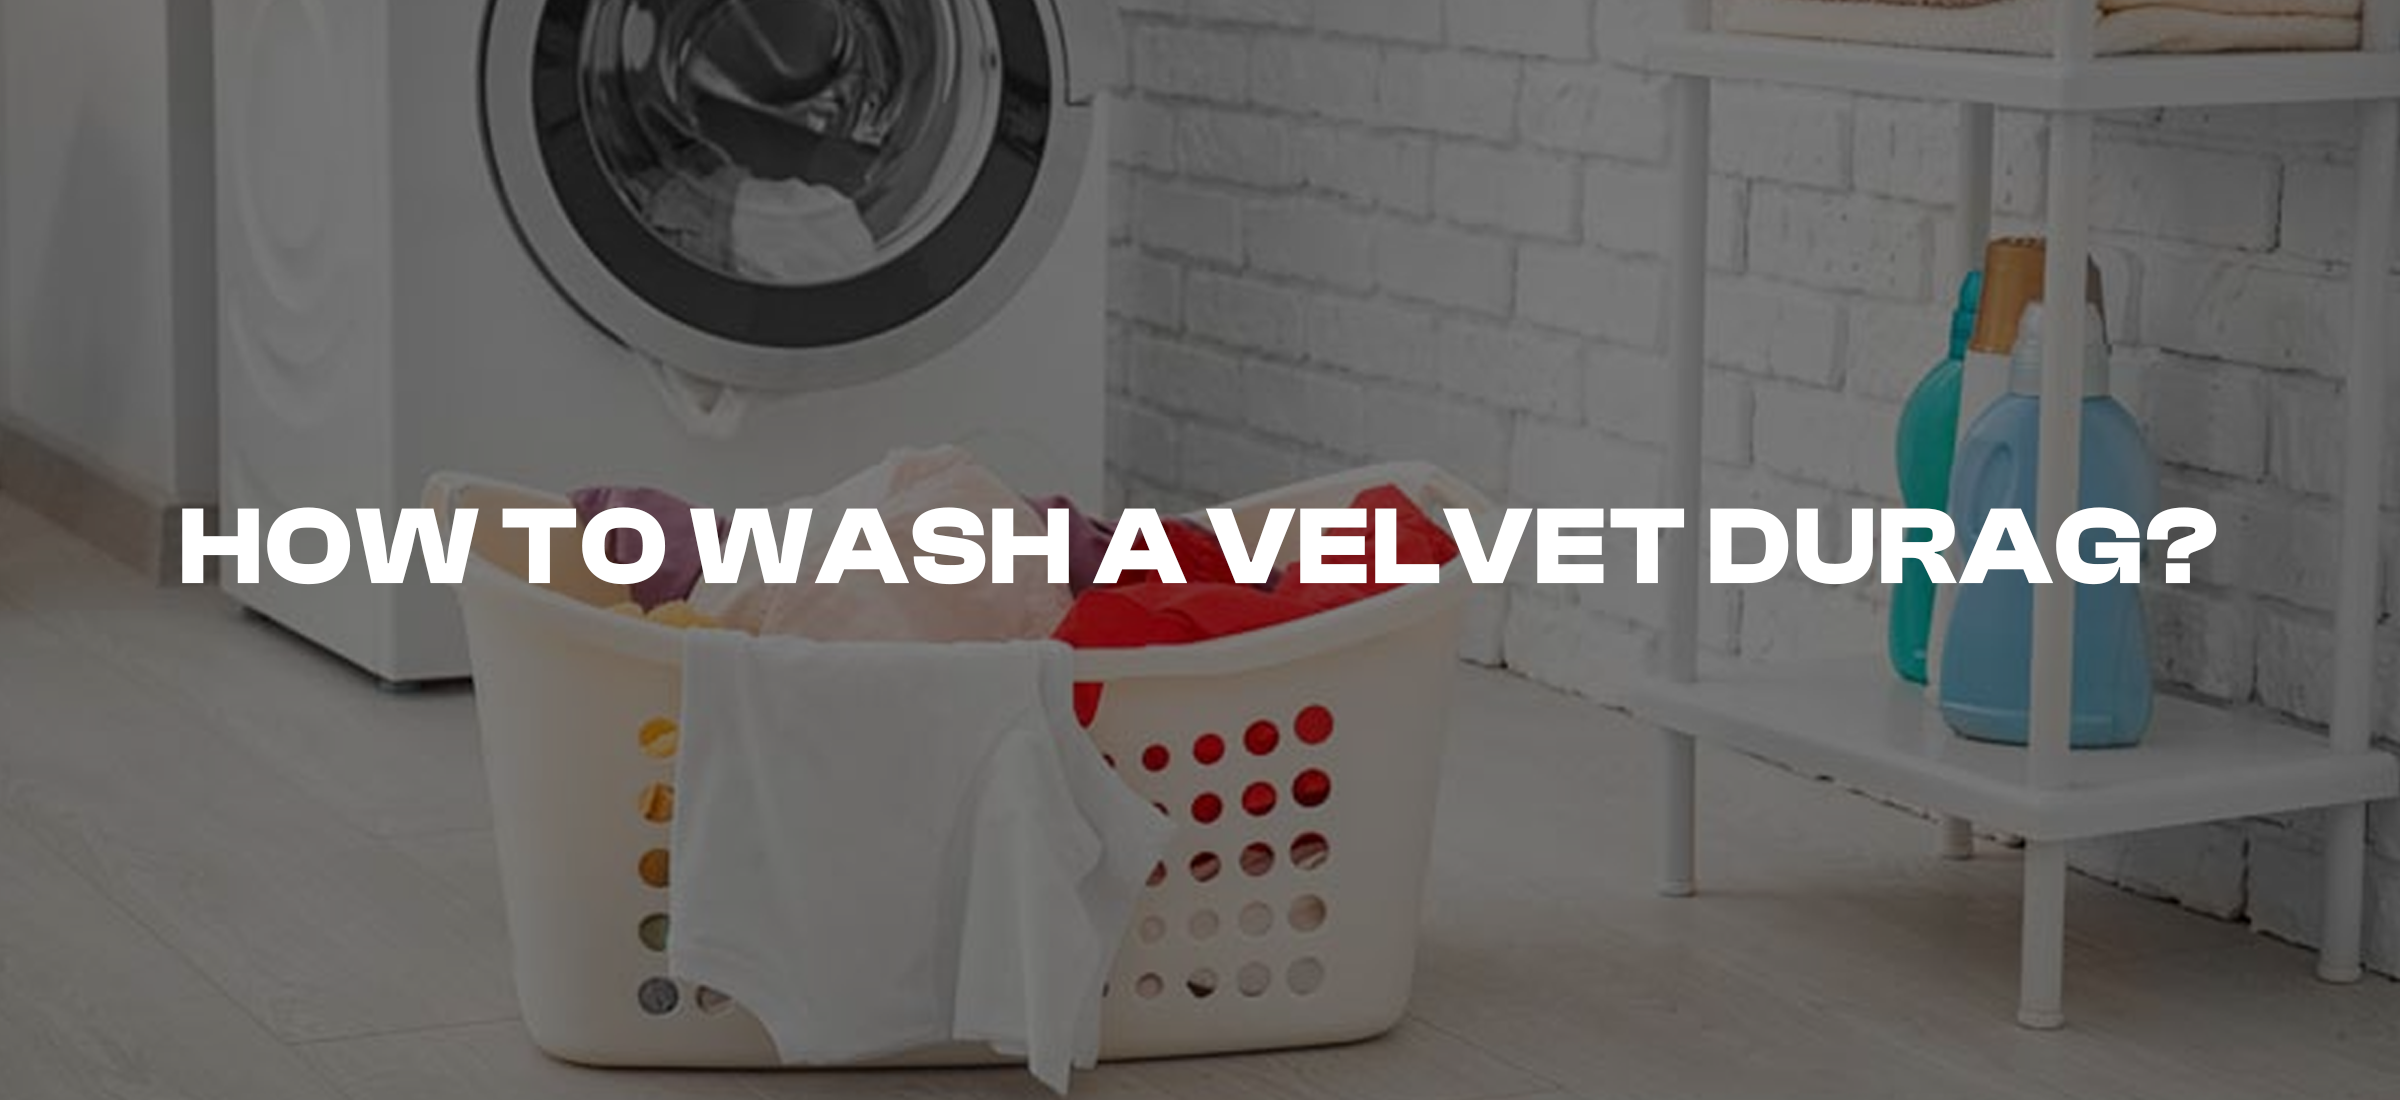 How to Wash a Velvet Durag: A Step-by-Step Guide